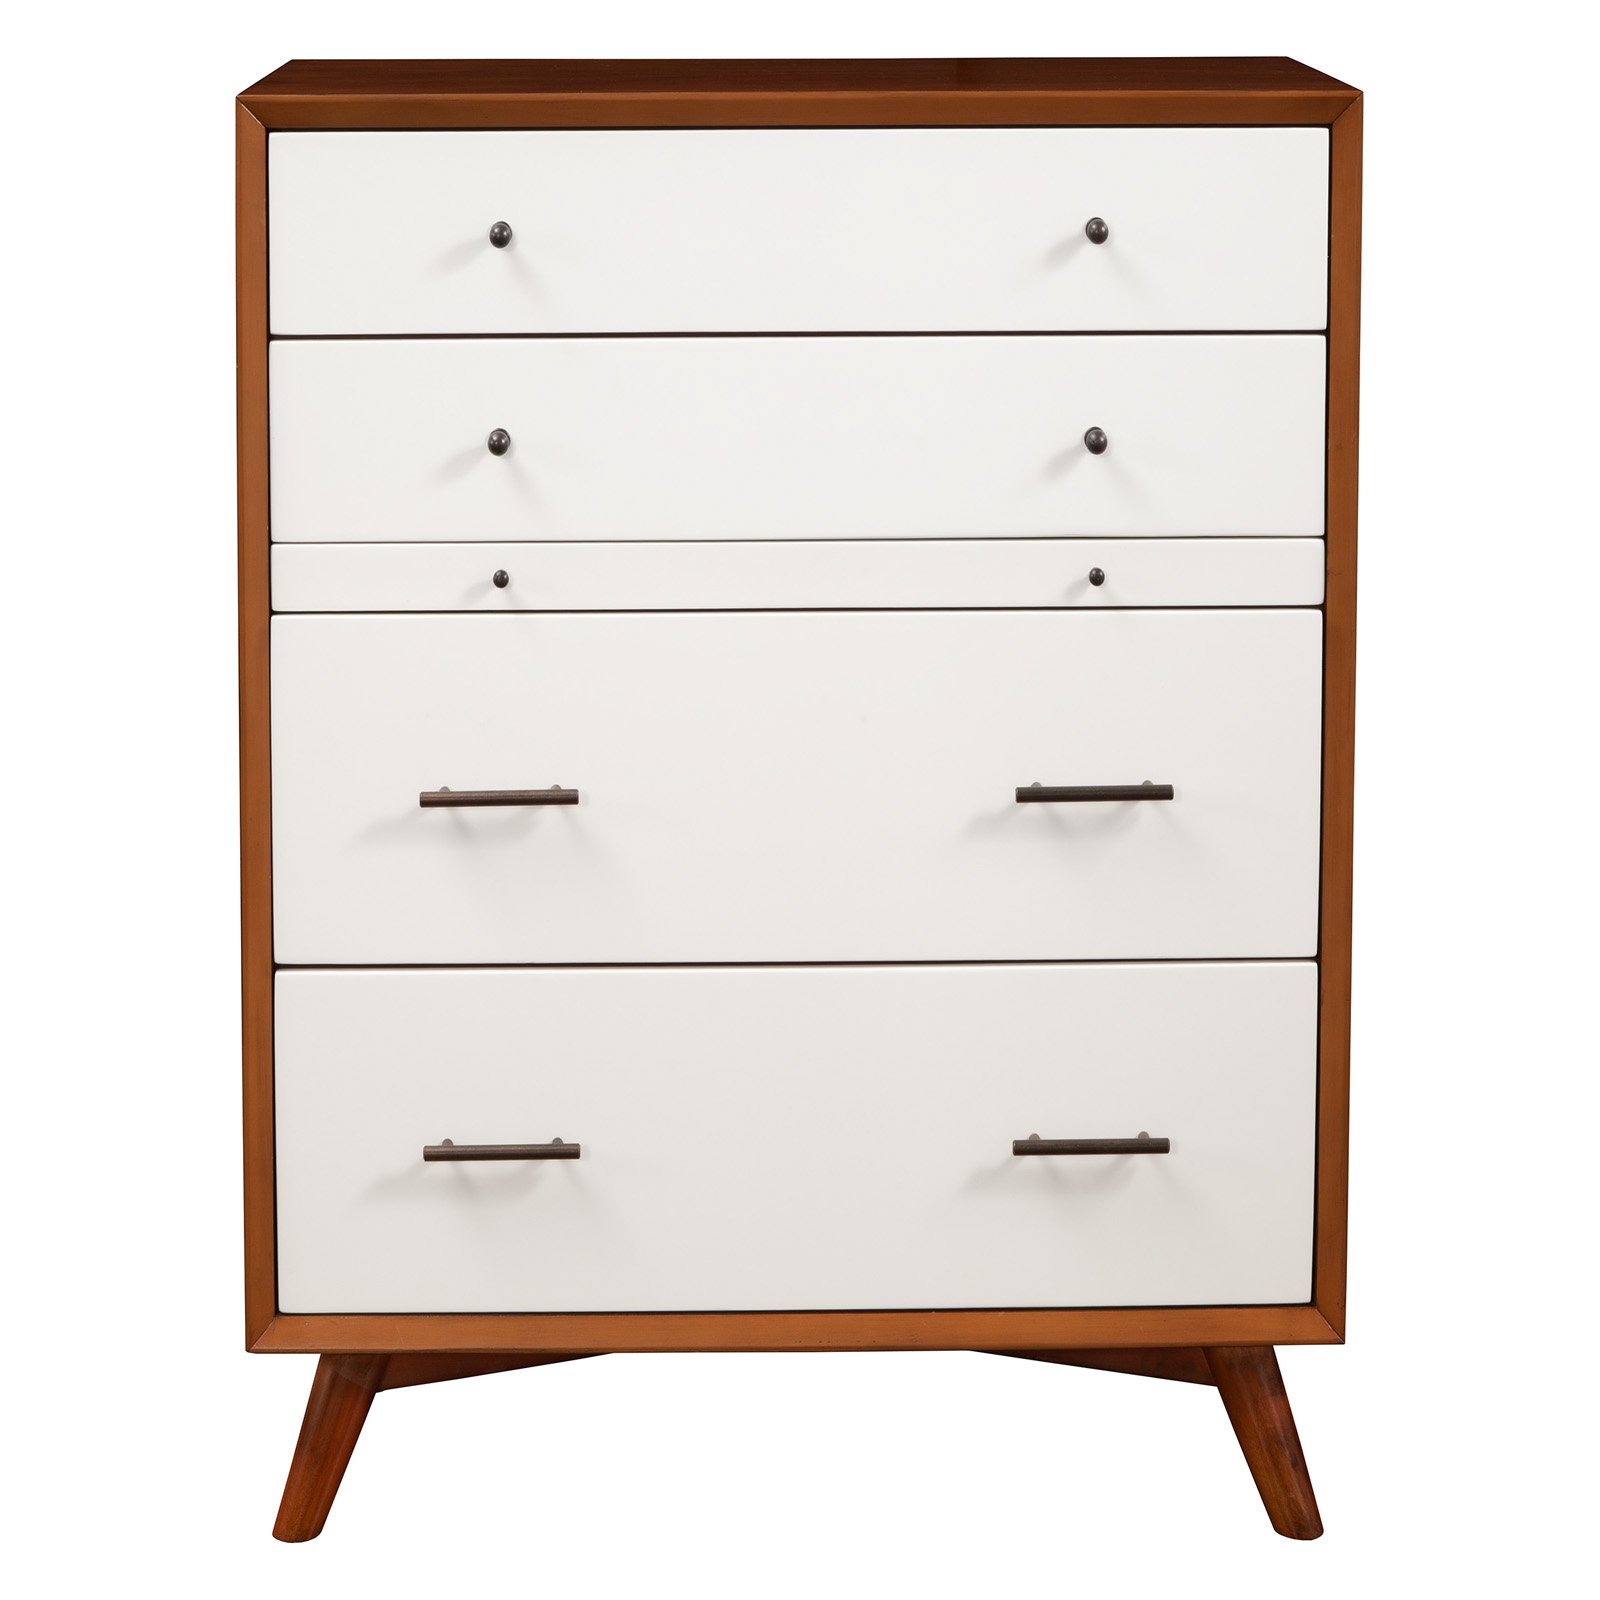 Alpine Furniture Flynn Mid Century Multi-function Wood Chest in Acorn-White - image 1 of 3